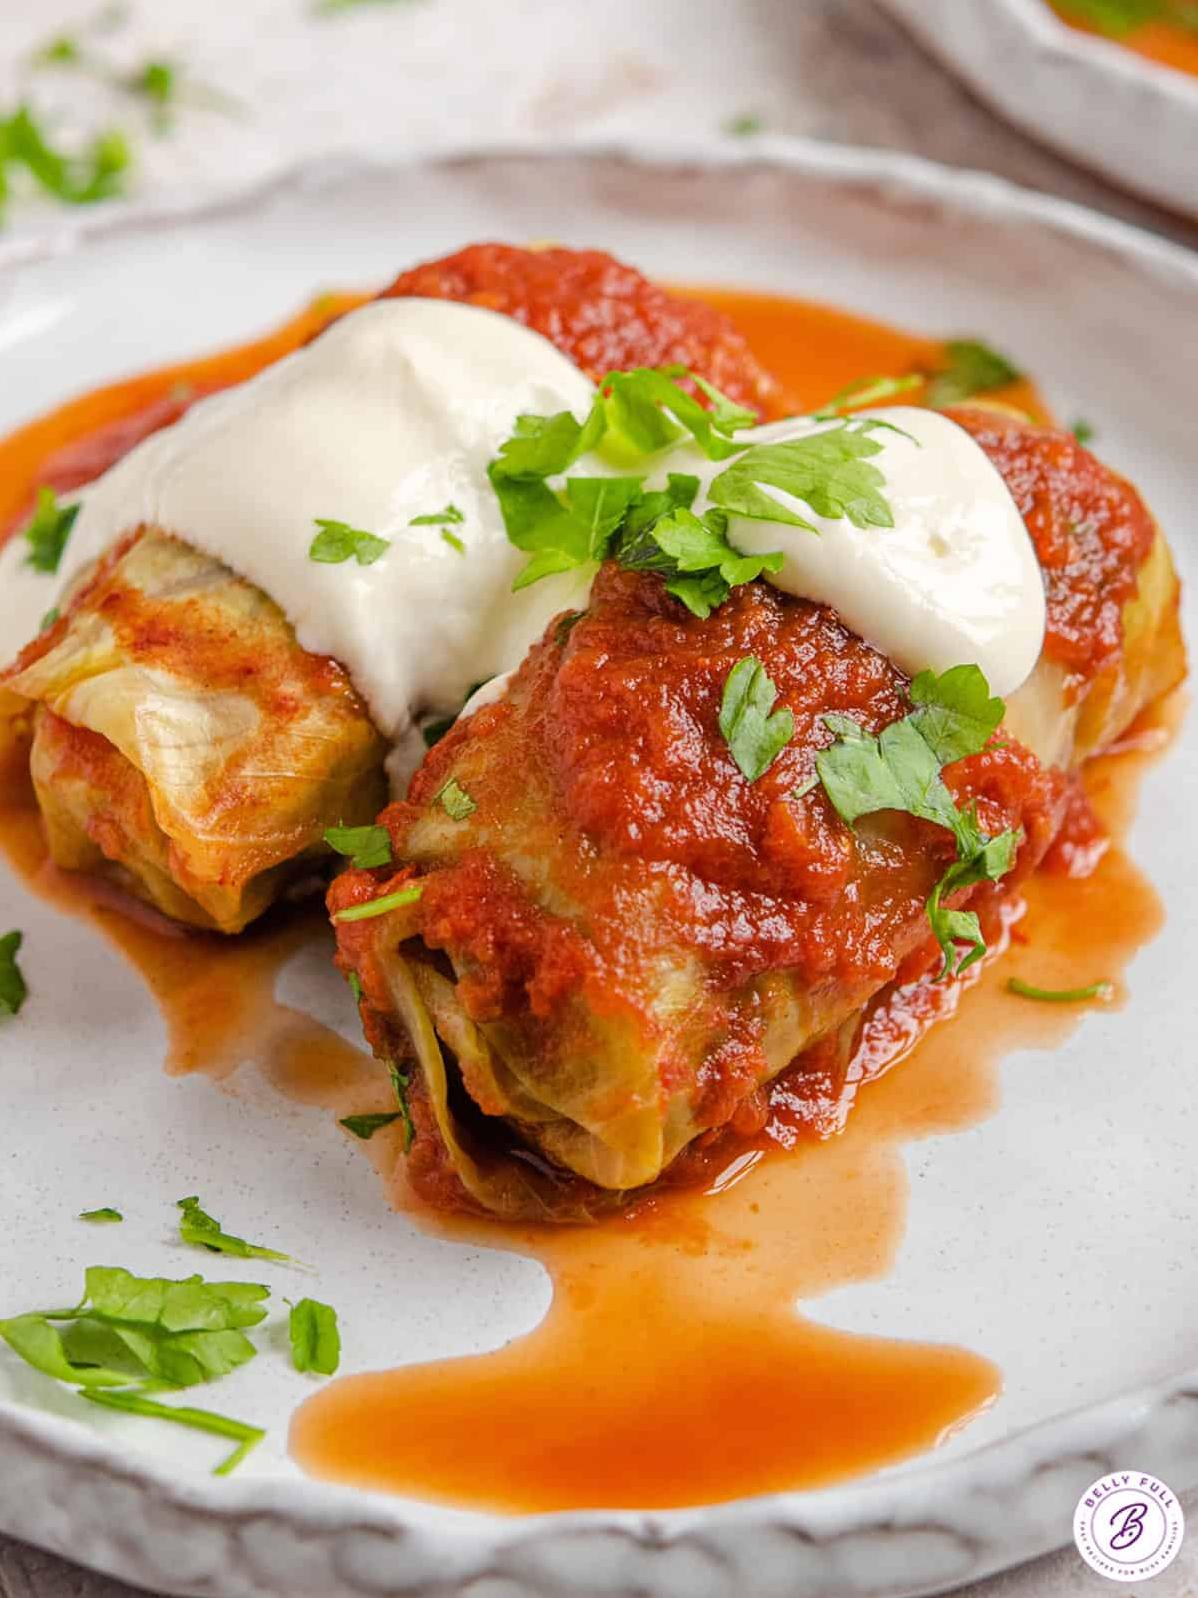  These Irish cabbage rolls are a fun and tasty twist on a classic dish.